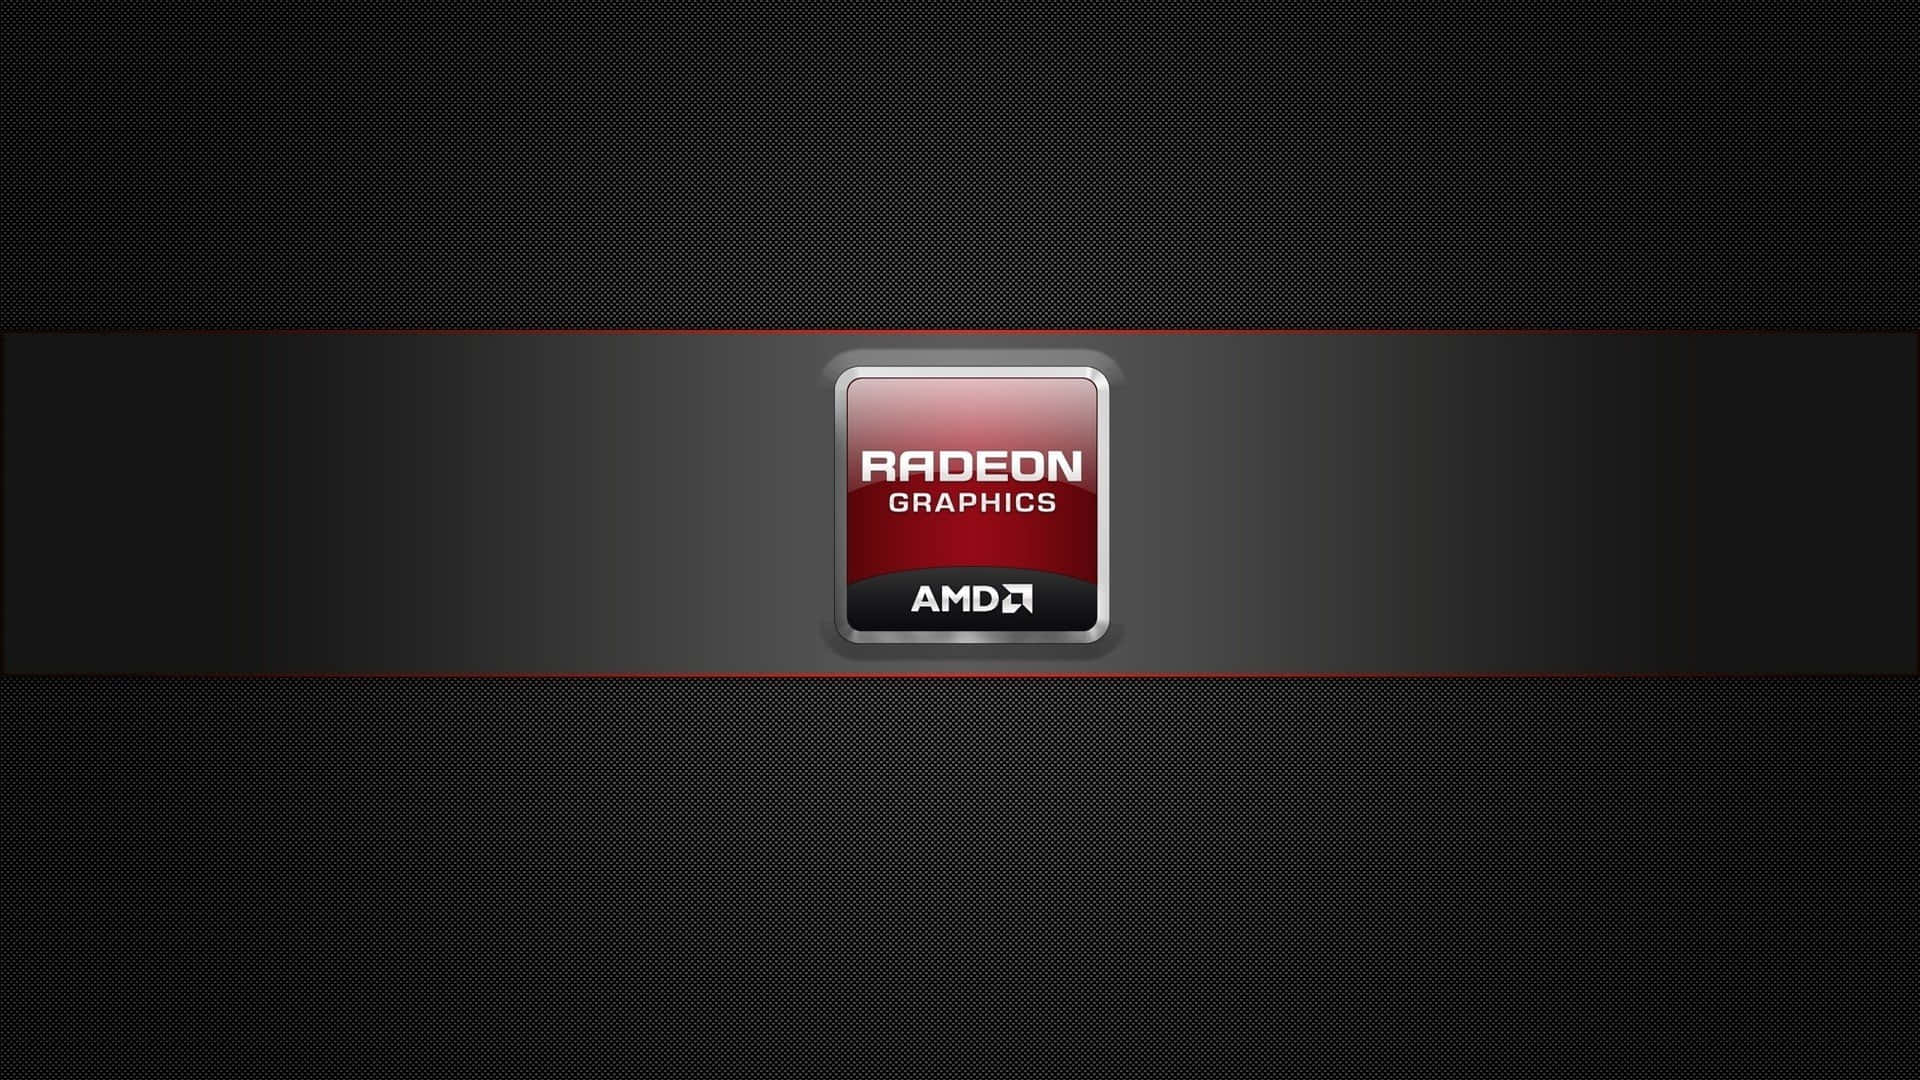 Experience seamless, powerful gaming with Radeon. Wallpaper